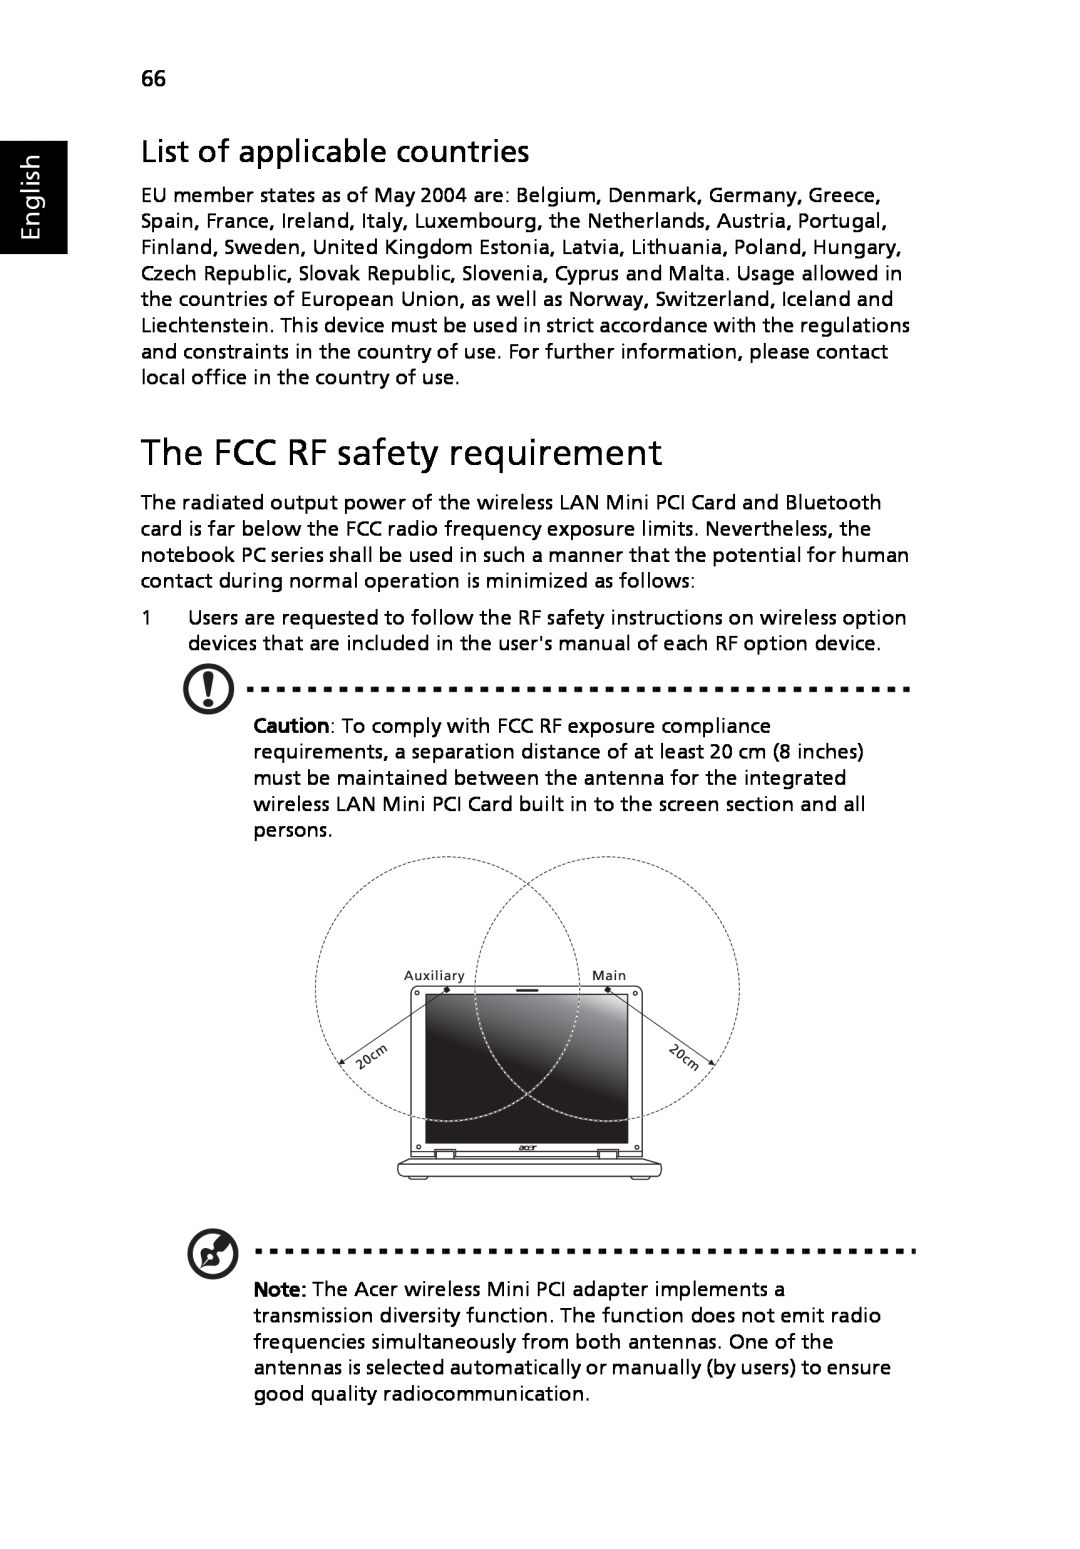 Acer 3630 manual The FCC RF safety requirement, List of applicable countries, English 